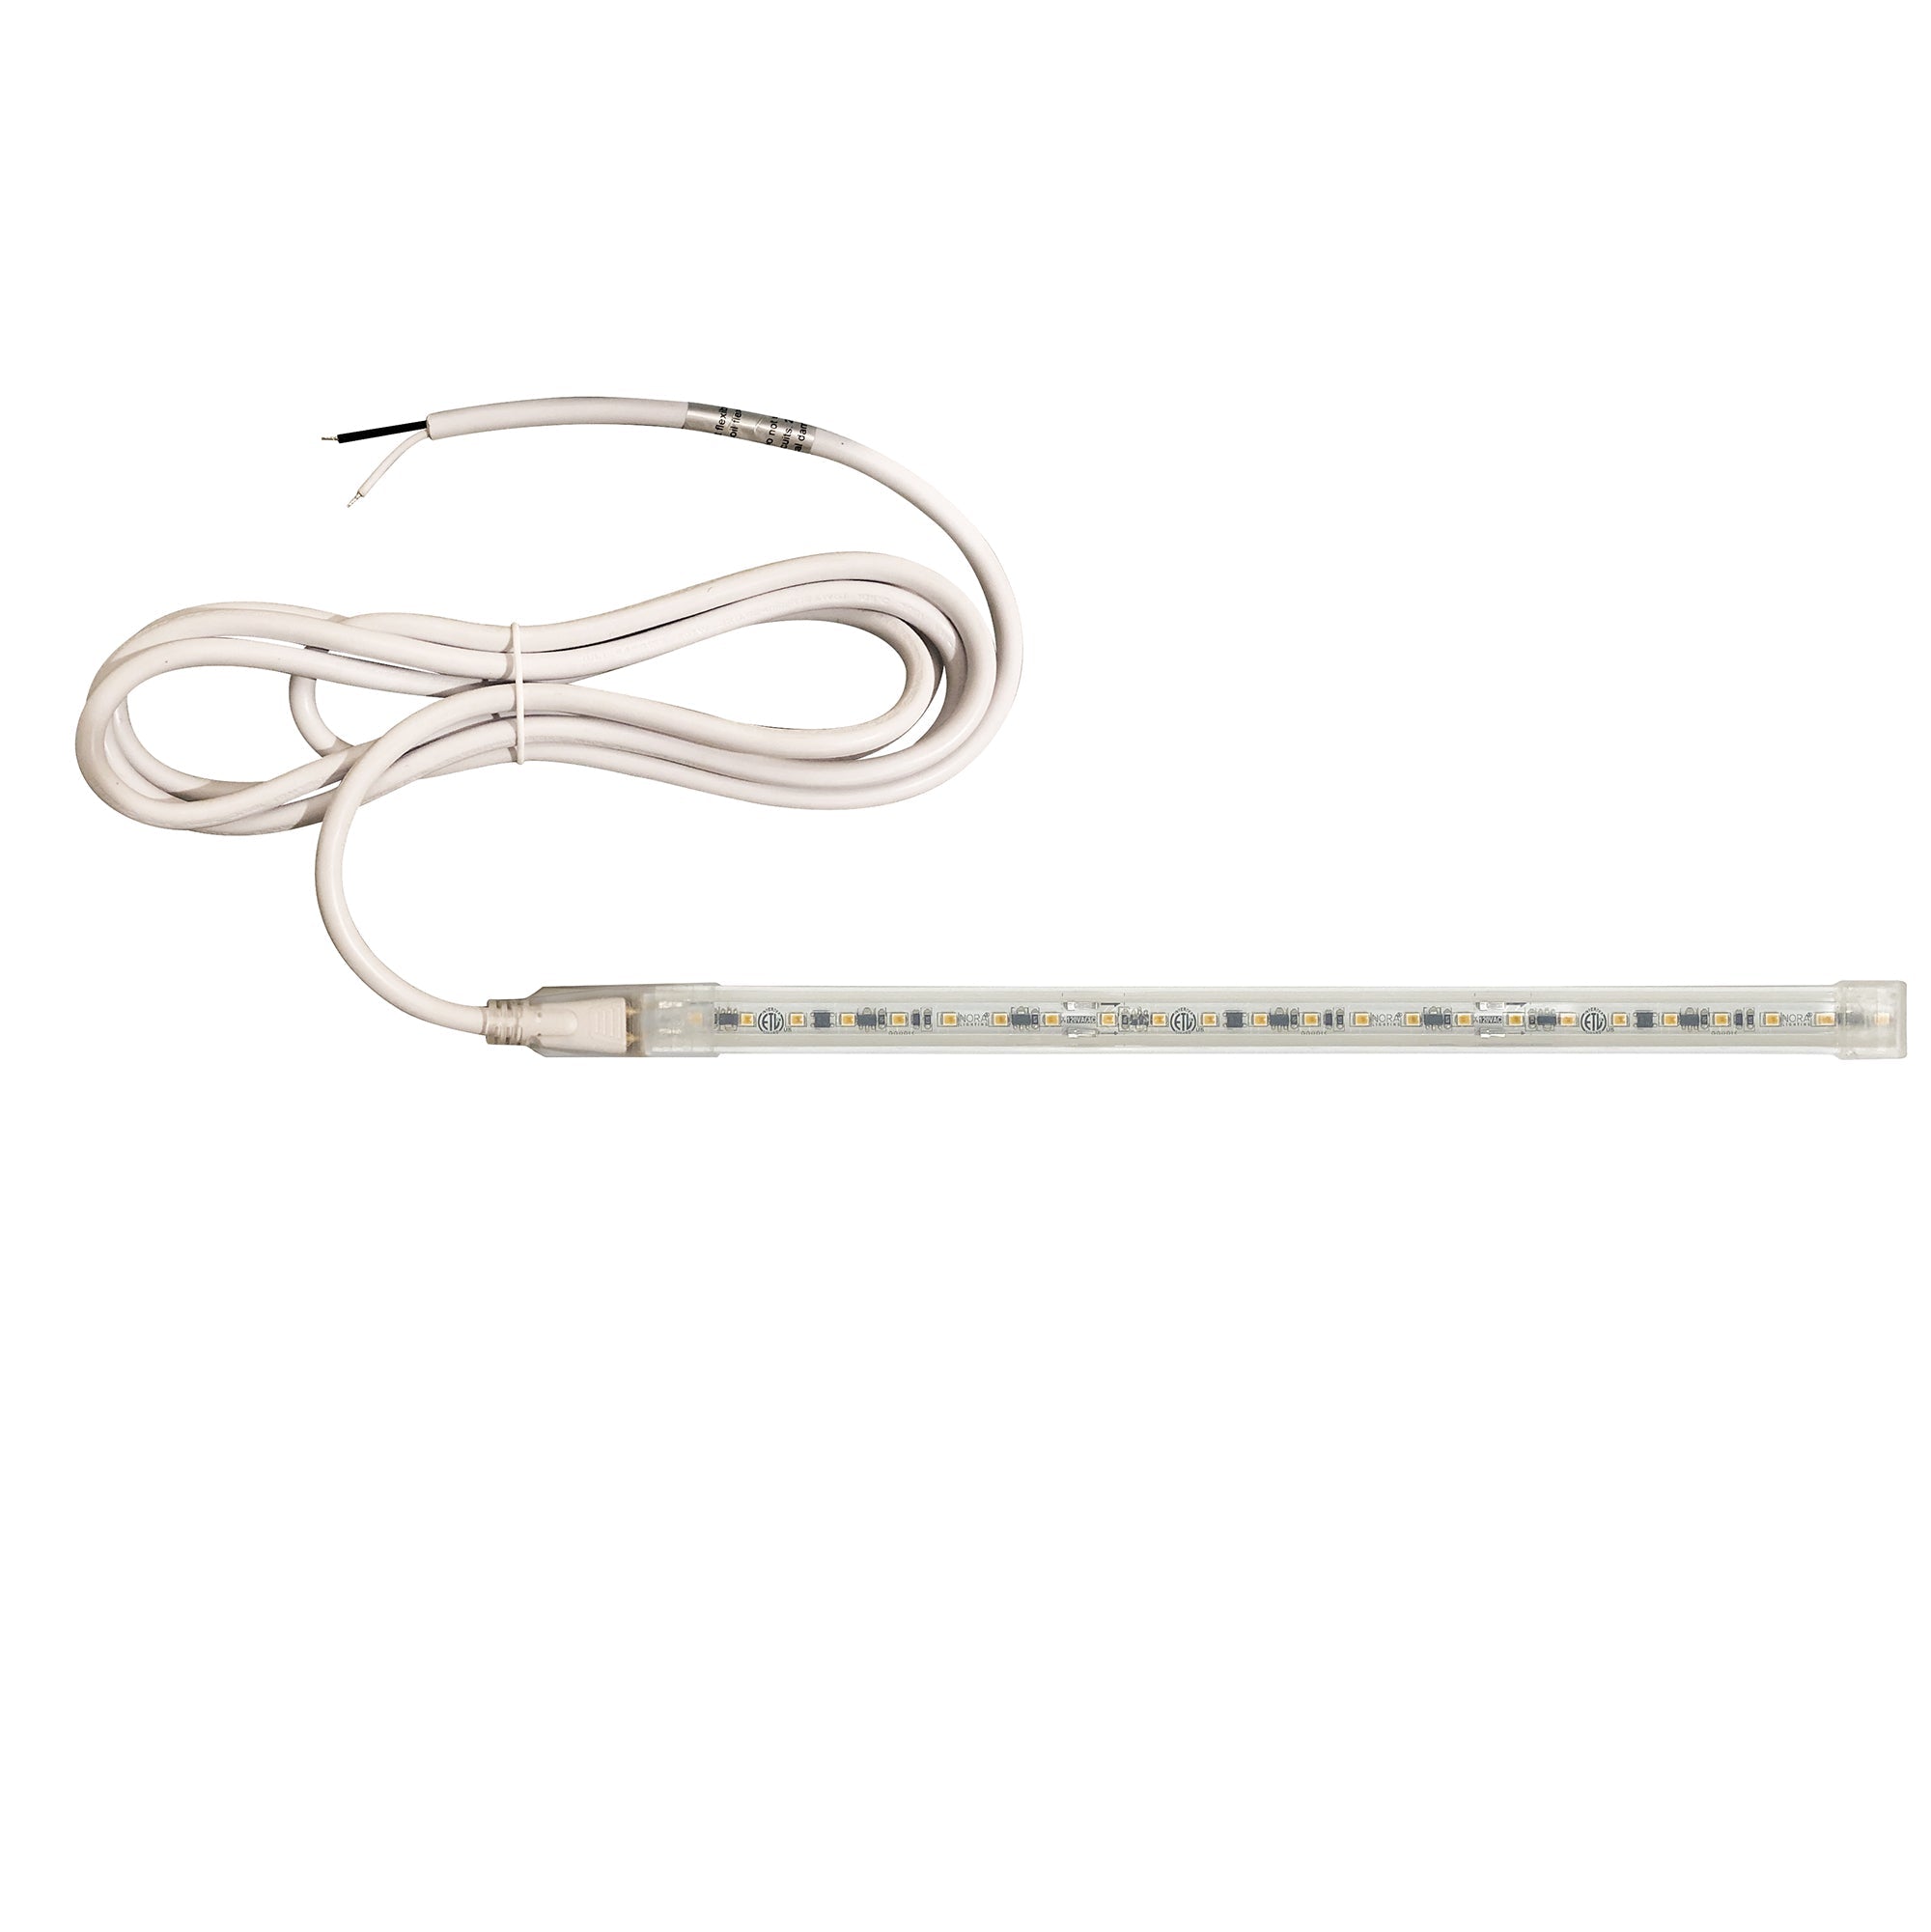 Nora Lighting NUTP13-W60-12-927/HW - Accent / Undercabinet - Custom Cut 60-ft 120V Continuous LED Tape Light, 330lm / 3.6W per foot, 2700K, w/ Mounting Clips and 8' Hardwired Power Cord